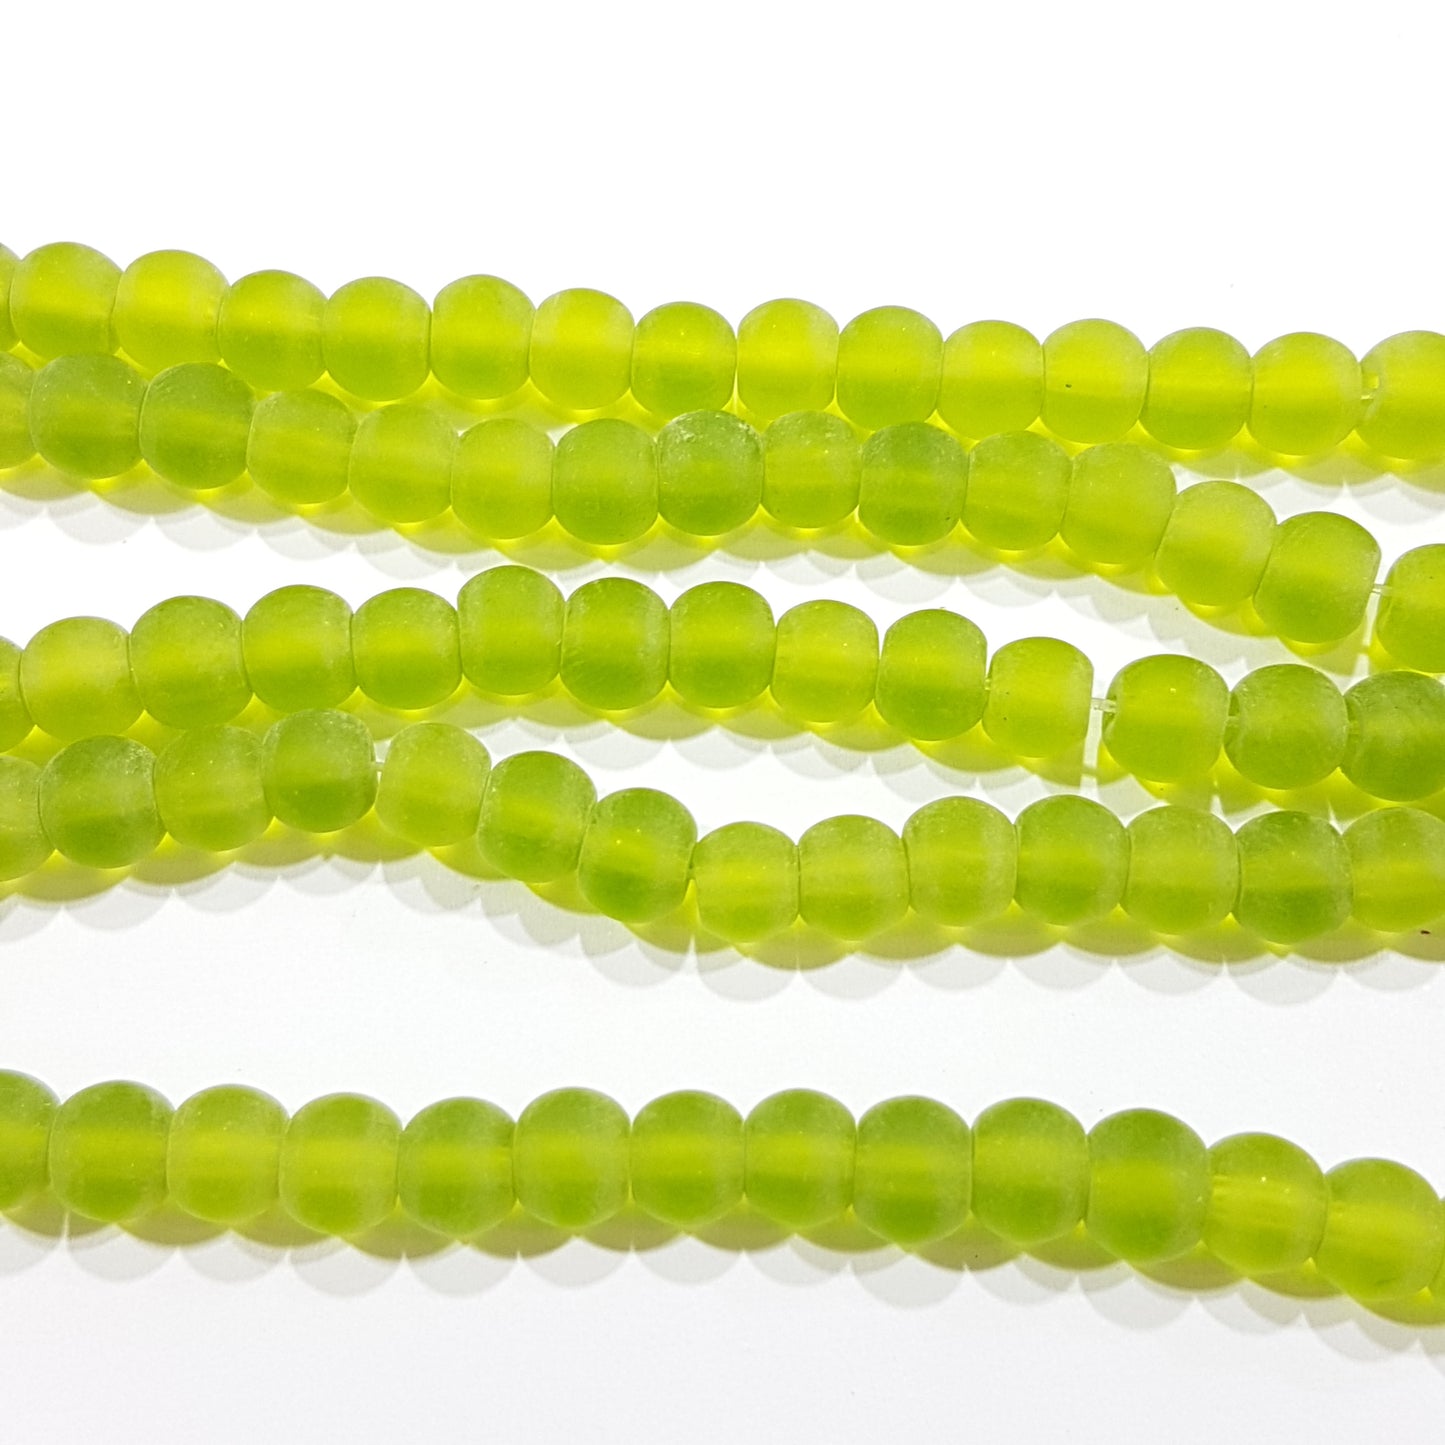 6mm Green Frosted Glass Beads